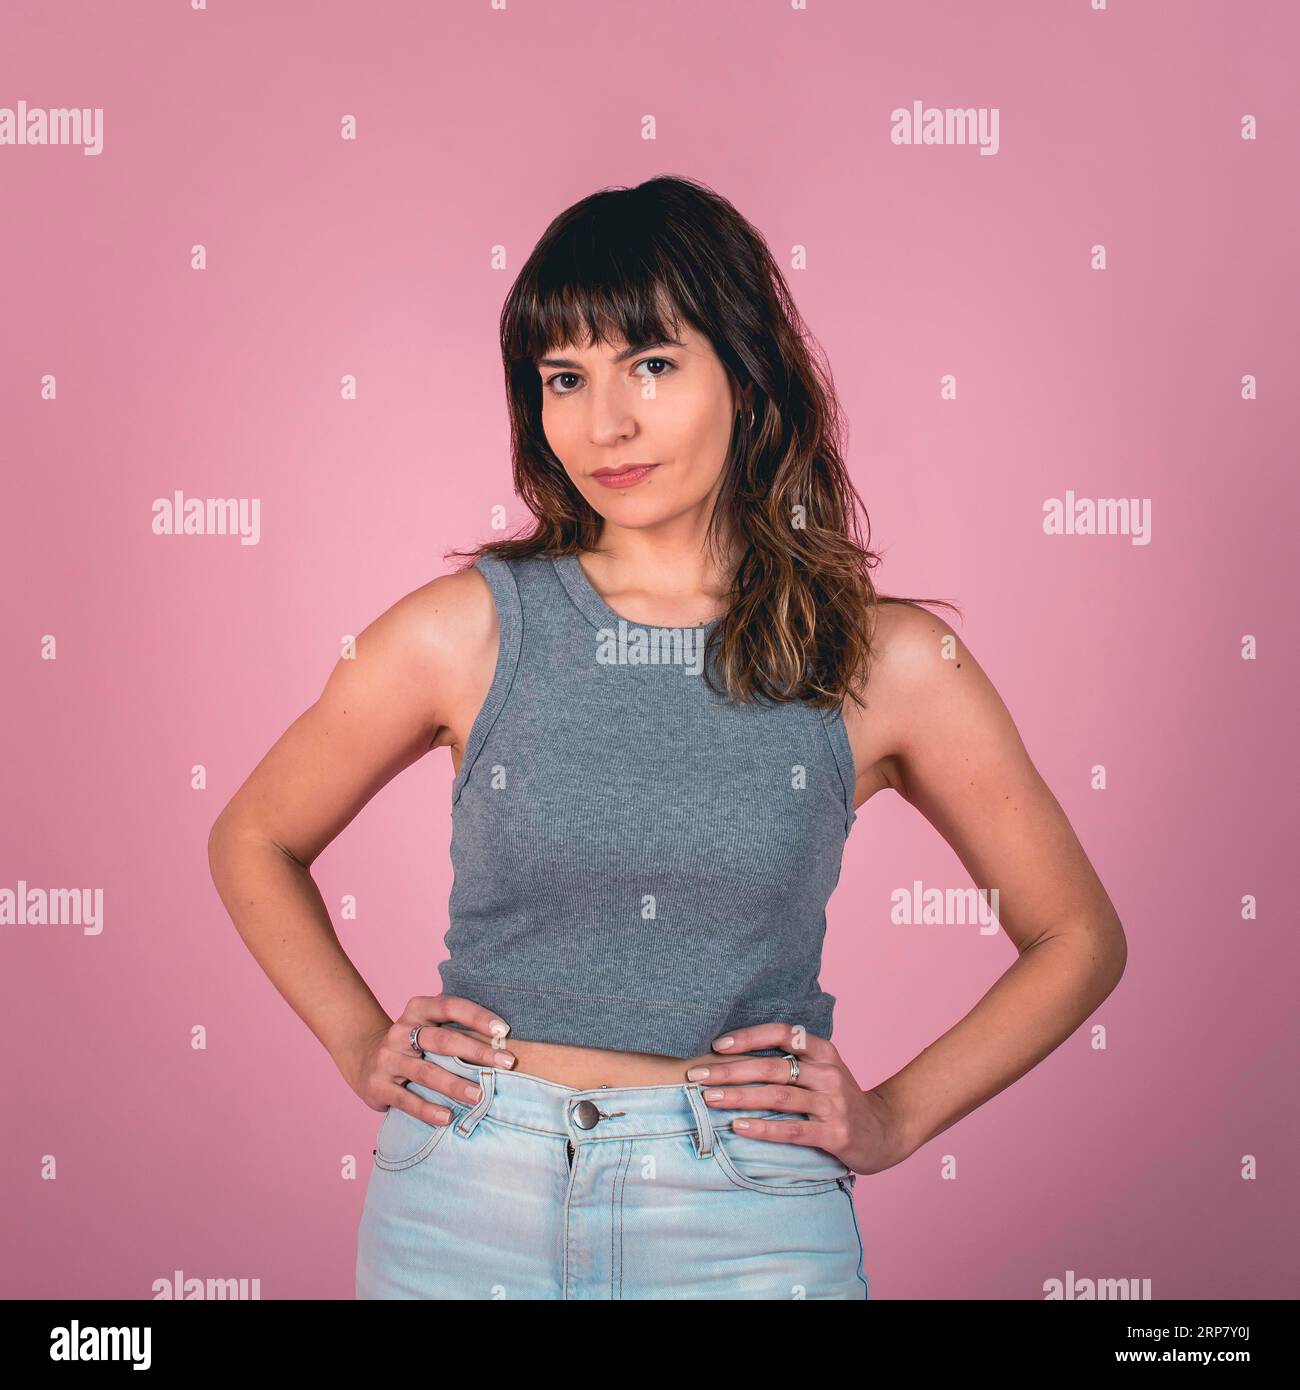 Studio portrait of a confidence woman with hands on hips while looking at camera over a pink background Stock Photo